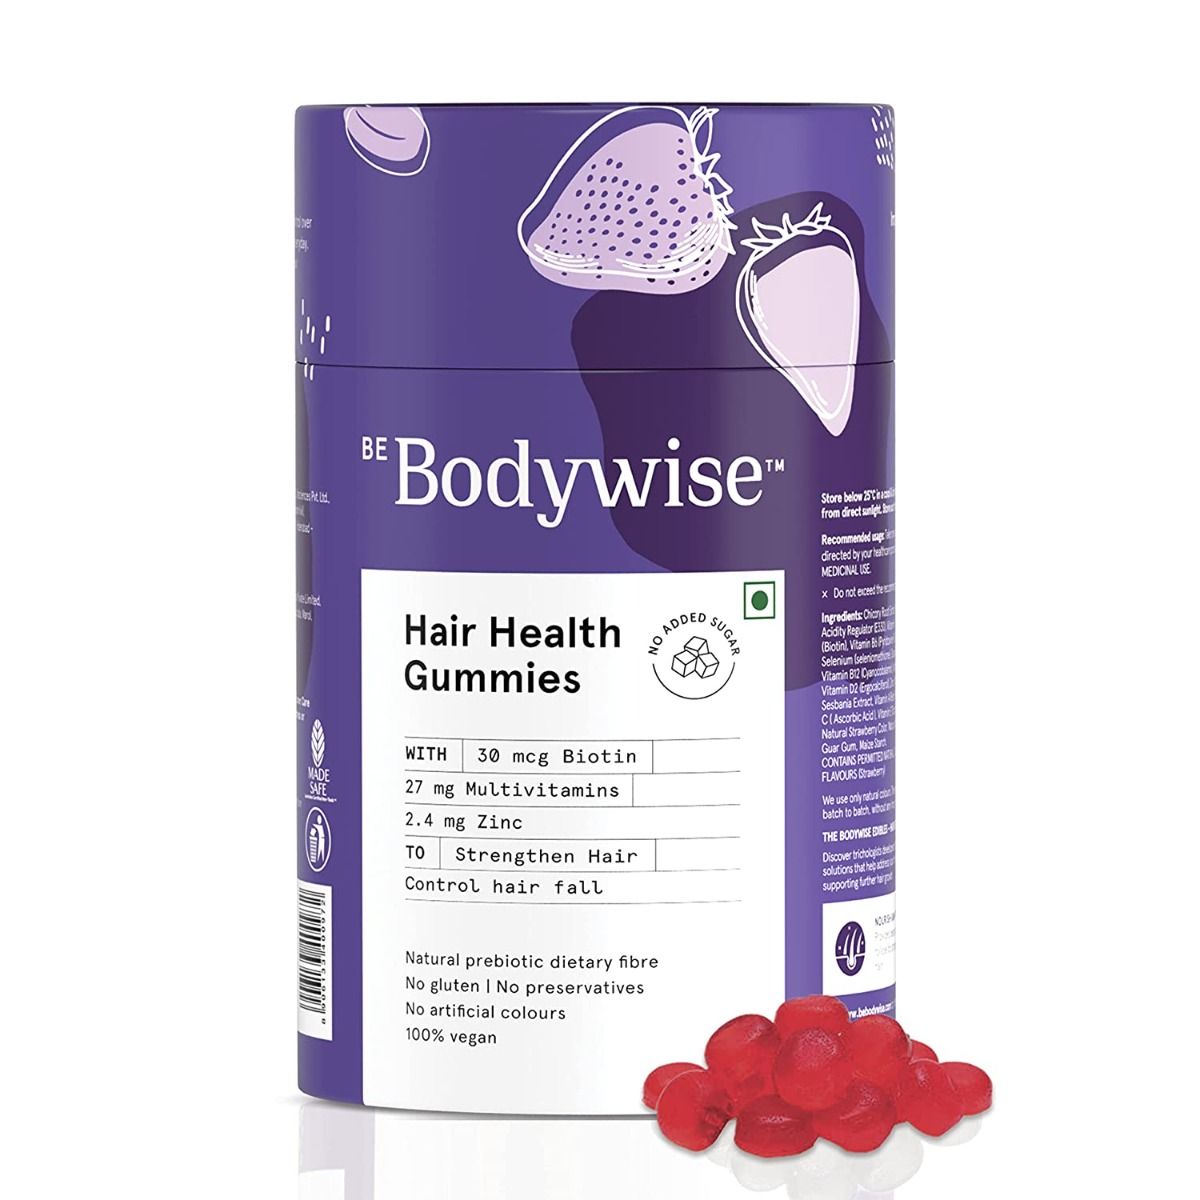 Be Bodywise Biotin Hair Gummies for Stronger Shinier Hair  Nails  60 Day  Pack  With High Potency Biotin Zinc Folic Acid  Multivitamins   Strawberry Flavored  No Added Sugar 